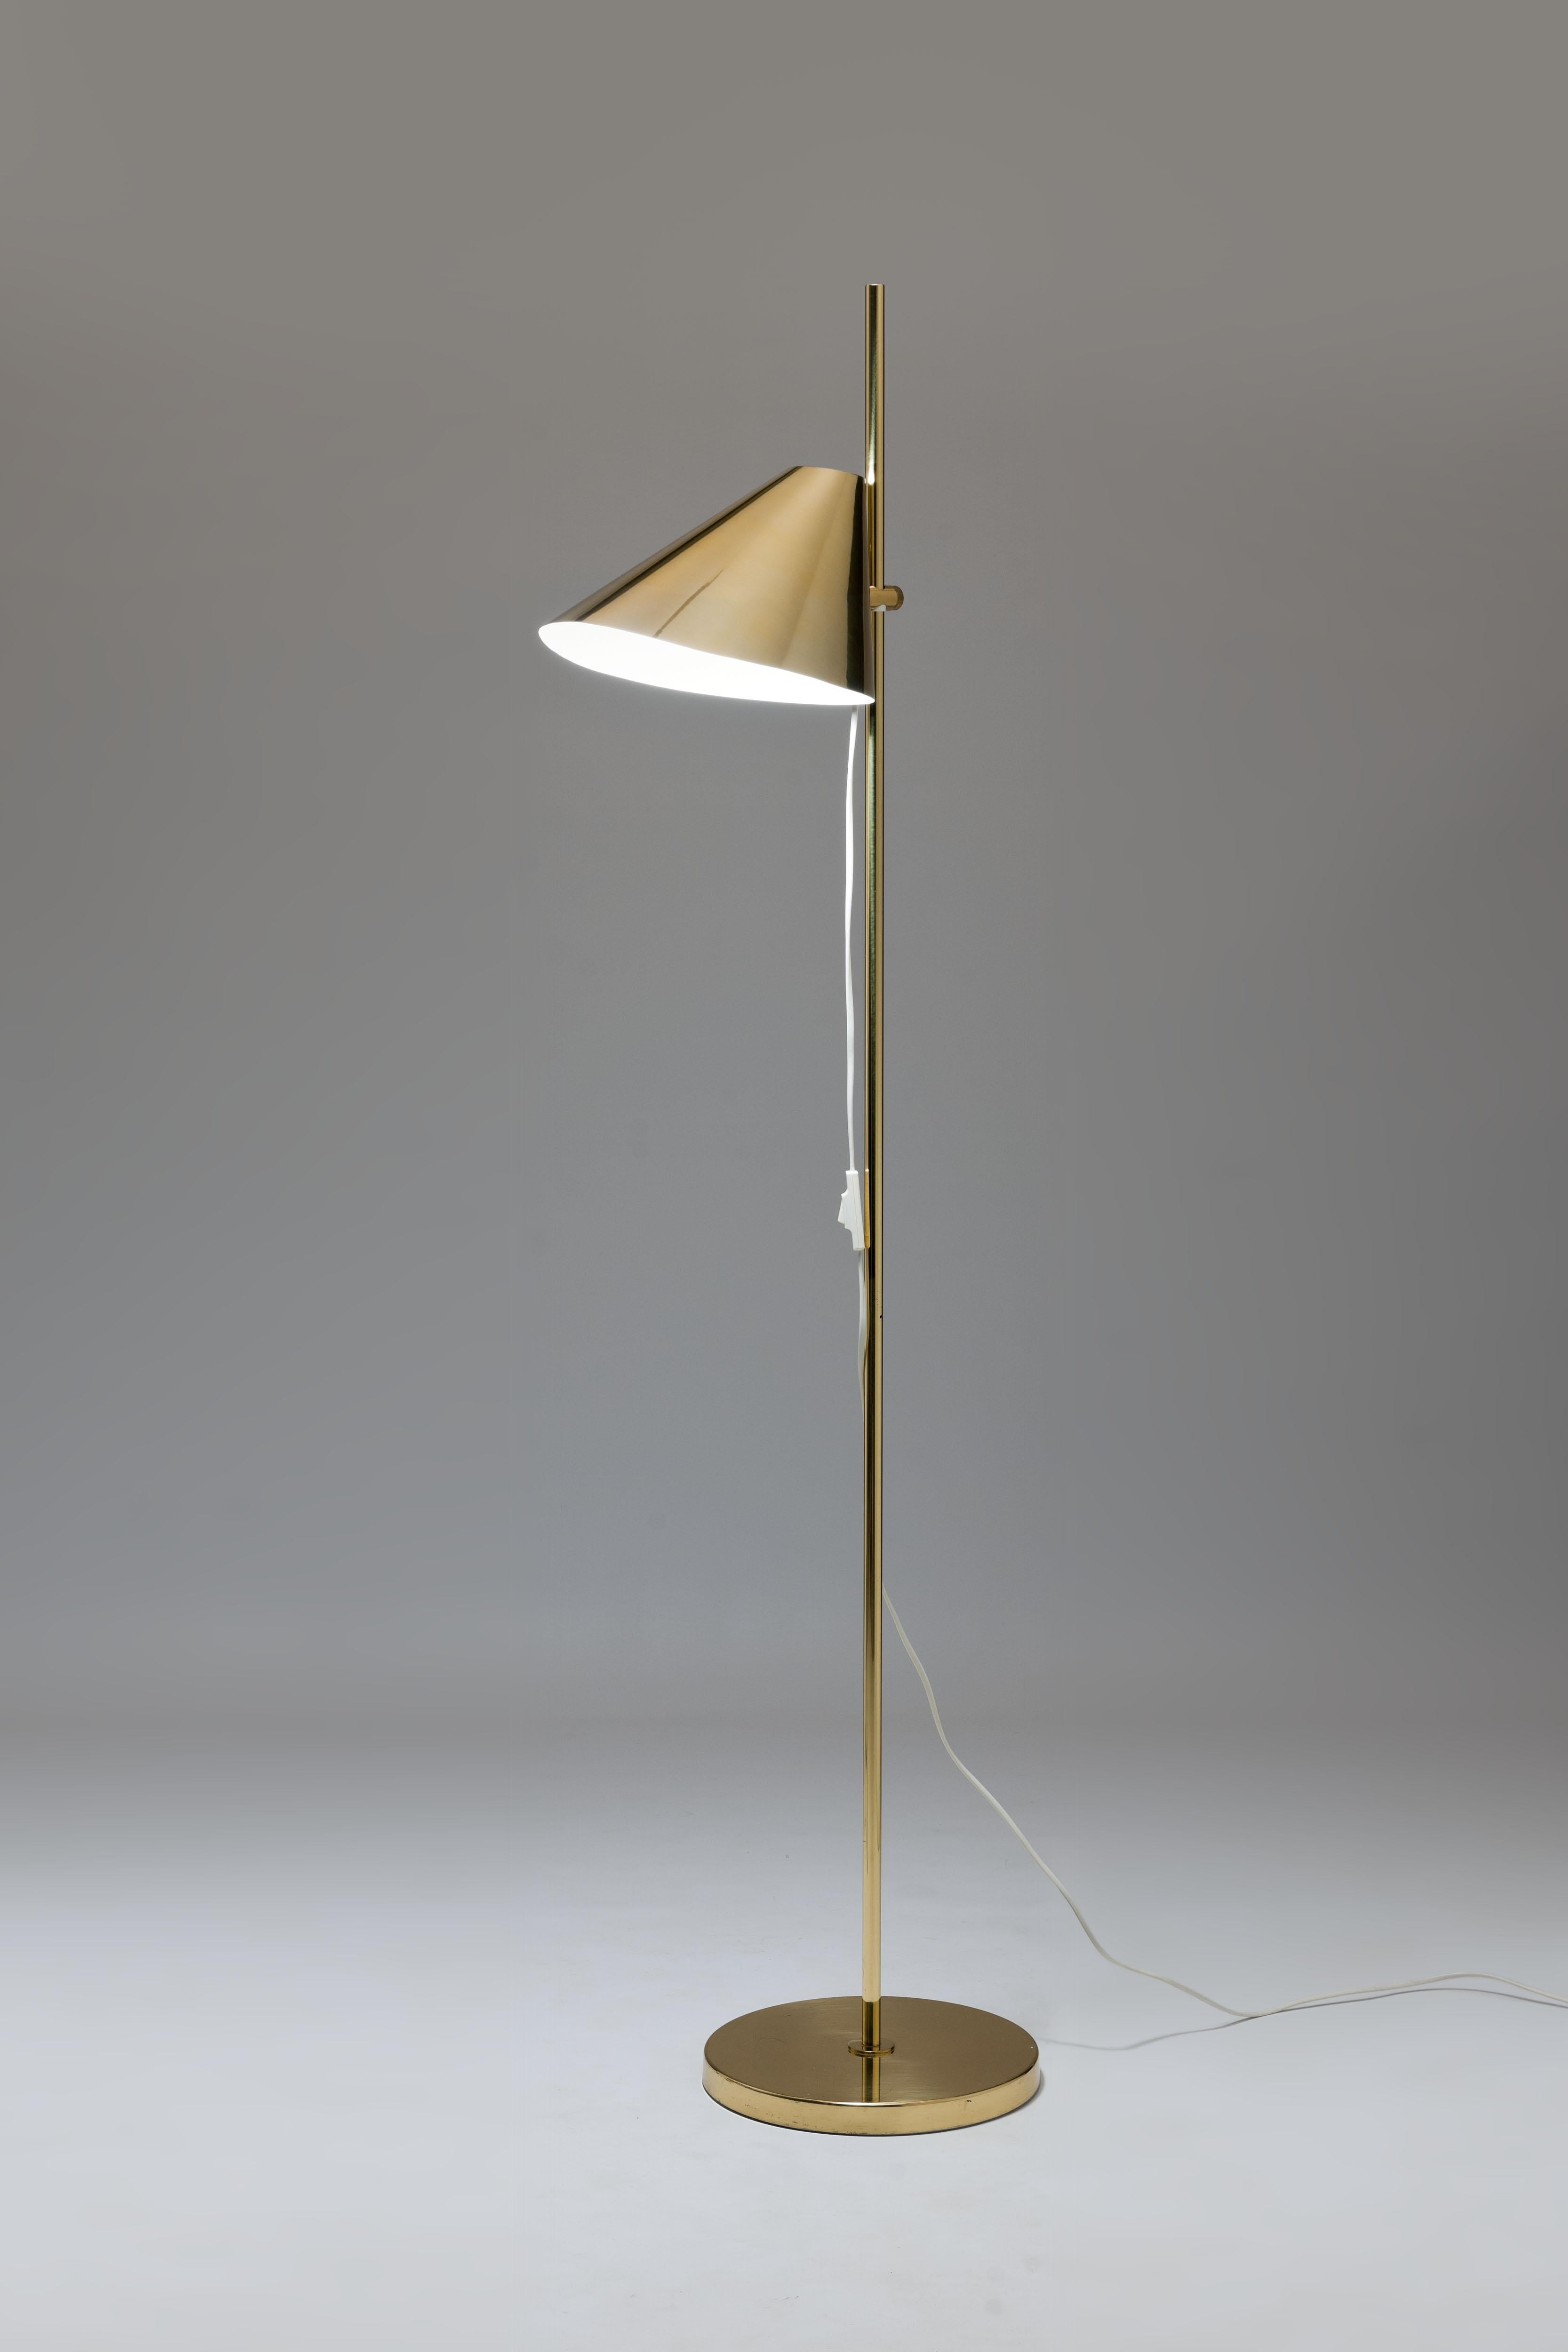 Floor lamp G185 by Swedish designer Hans Agne Jakobsson, 1970s in brass execution. 
The lamp is made by Jakobsson's own company in Markaryd Sweden that he esteblished already in the early 1950s.
The specific cone shape hood is adjustable in height